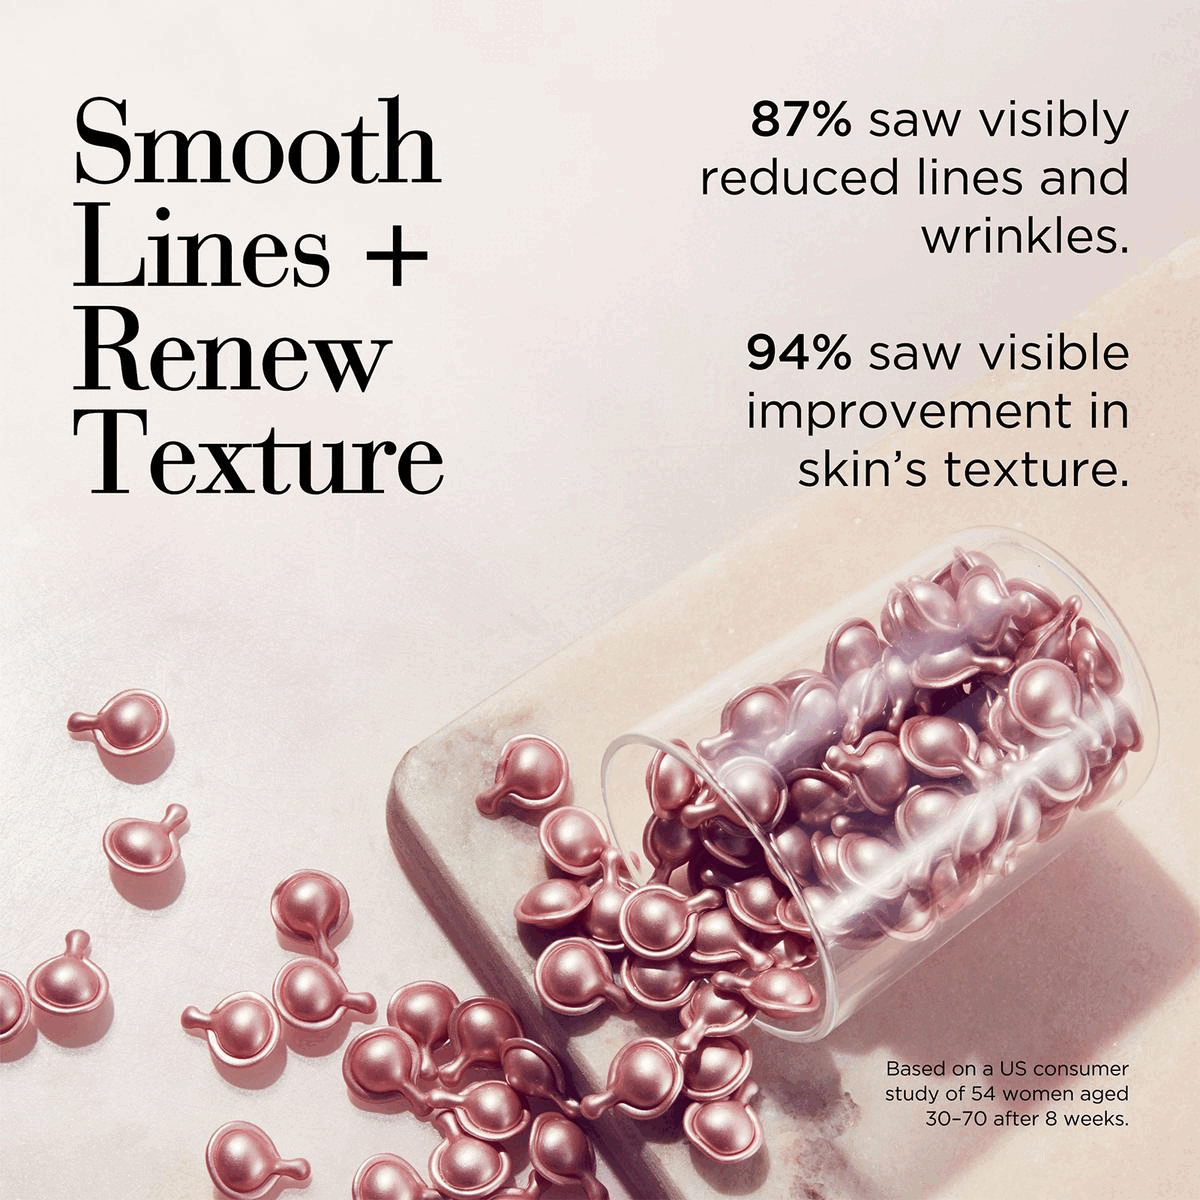 Image 1: 87% saw visibly reduced lines and wrinkles. Smooth Lines + Renew Texture 94% saw visible improvement in skin's texture. Based on a US consumer study of 54 women aged 30-70 after 8 weeks. Image 2: 76% more potent than unencapsulated retinol, Based on testing of unencapsulated retinol equivalent preditive of 10 months of shelf life. Image 3: Retinol Ceramide Line Erasing Eye Cream Elizabeth Arden NEW YORK RETINOL Ceramide Line Erasing Eye Cream Crème Contour des Yeux Effaceur de Ridules 98% saw an overall improvement in eye area Based on a 4-week consumer study of 54 women, ages 25-55. Image 4: Lift and Firm Night Cream An ultra-rich and fast-absorbing silky formula that offers skin a youth-restoring boost overnight. Image 5: Regime Step 1 Smooth Lines & Renew Texture with Retinol Capsules, Step 2 Smooth, Brighten & De-puff with Retinol Eye Cream RETINOL Ceramide Capsules Line Erasing Night Serum Serum de Nuit Elfaceur de Ridules, Step 3 Give Skin a Youthful Boost with Advanced Ceramide Lift and Firm